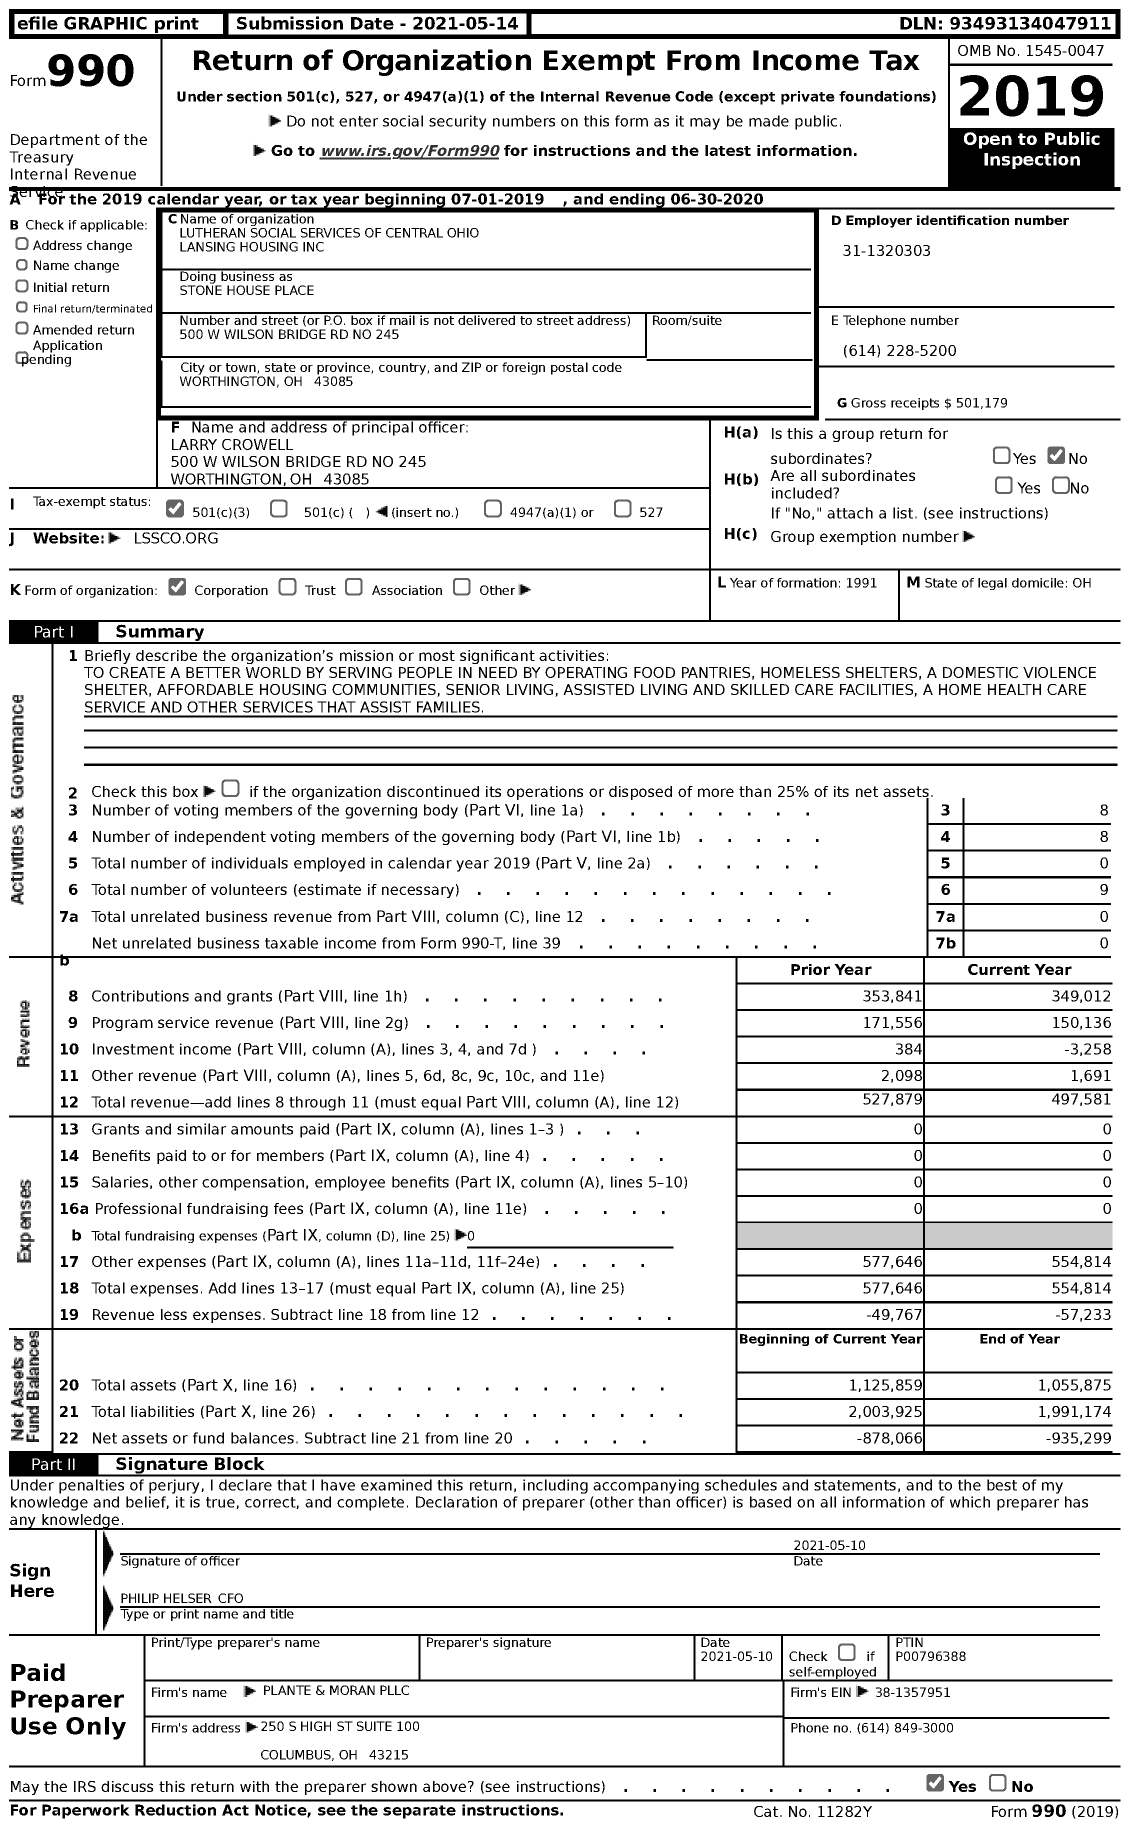 Image of first page of 2019 Form 990 for Lutheran Social Services of Central Ohio LANSING HOUSING